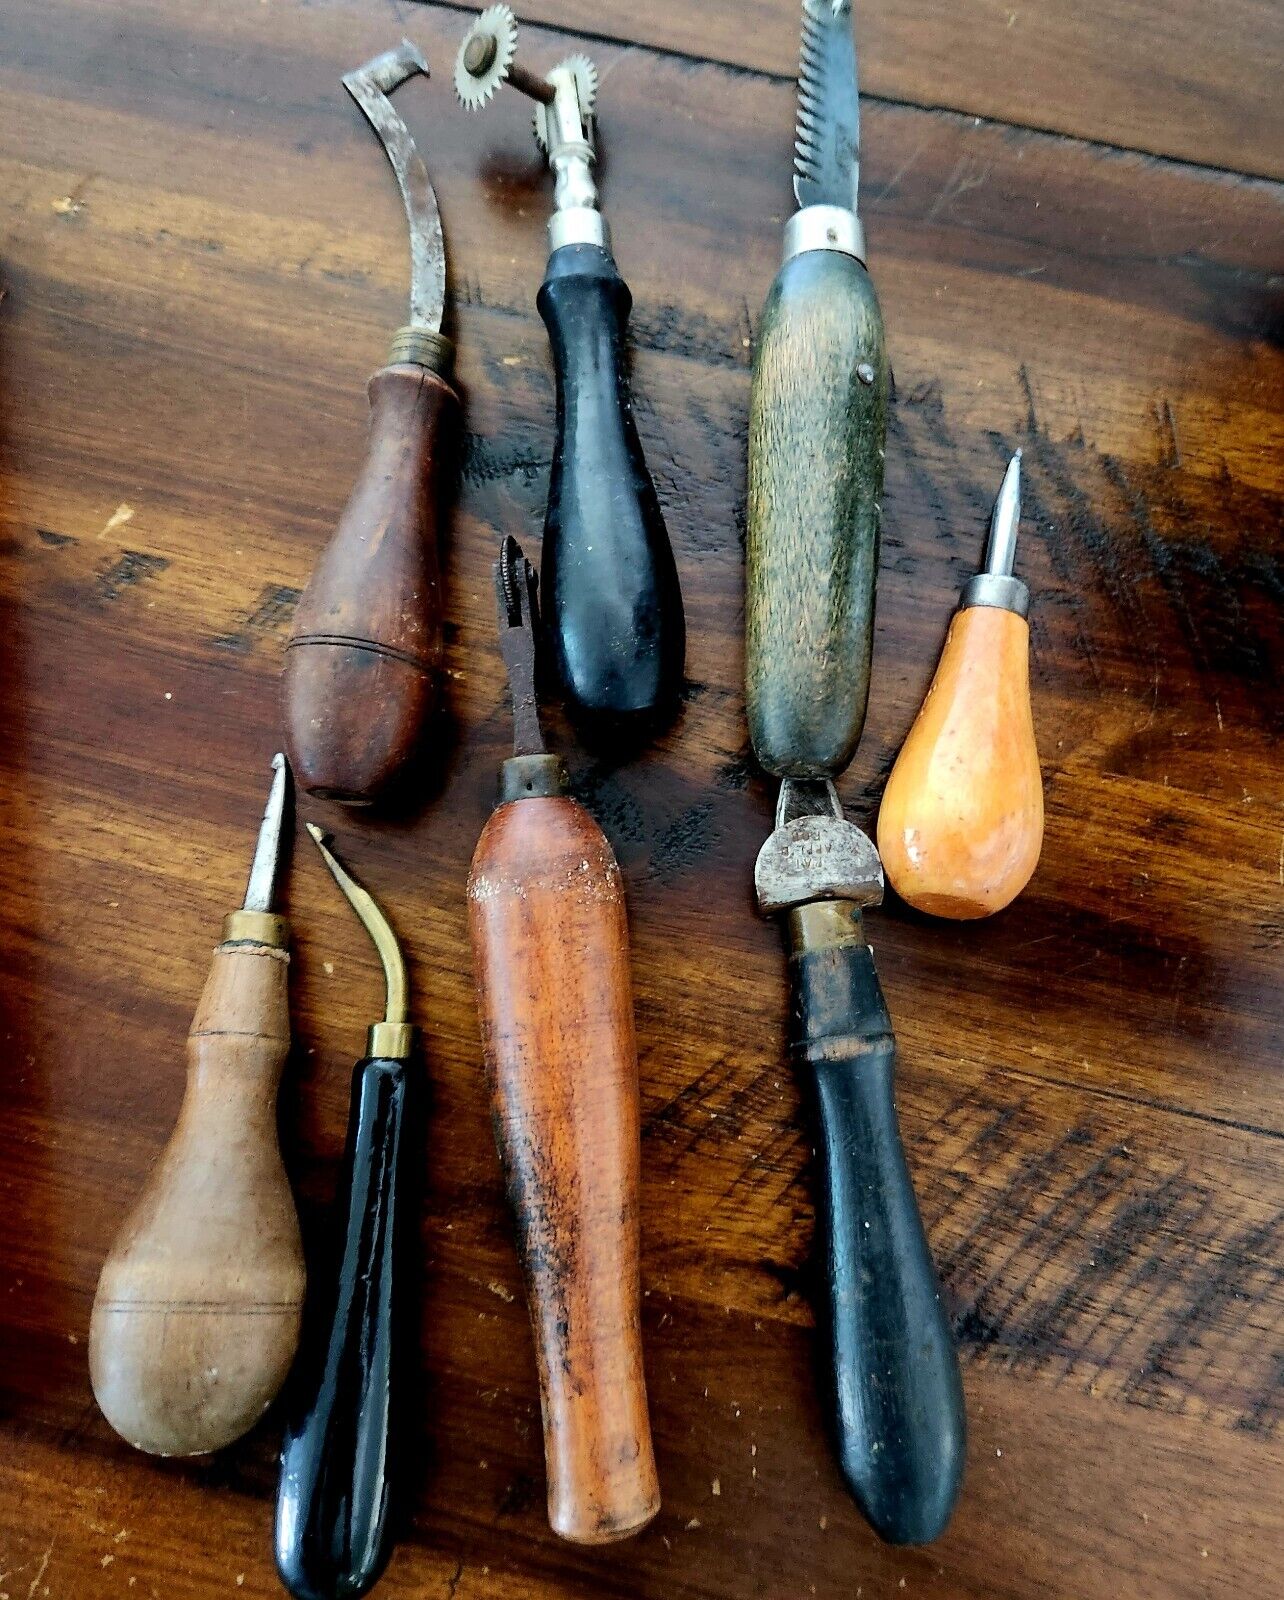 7 awl tools hand woodworking antique primitive vintage leather work metal...